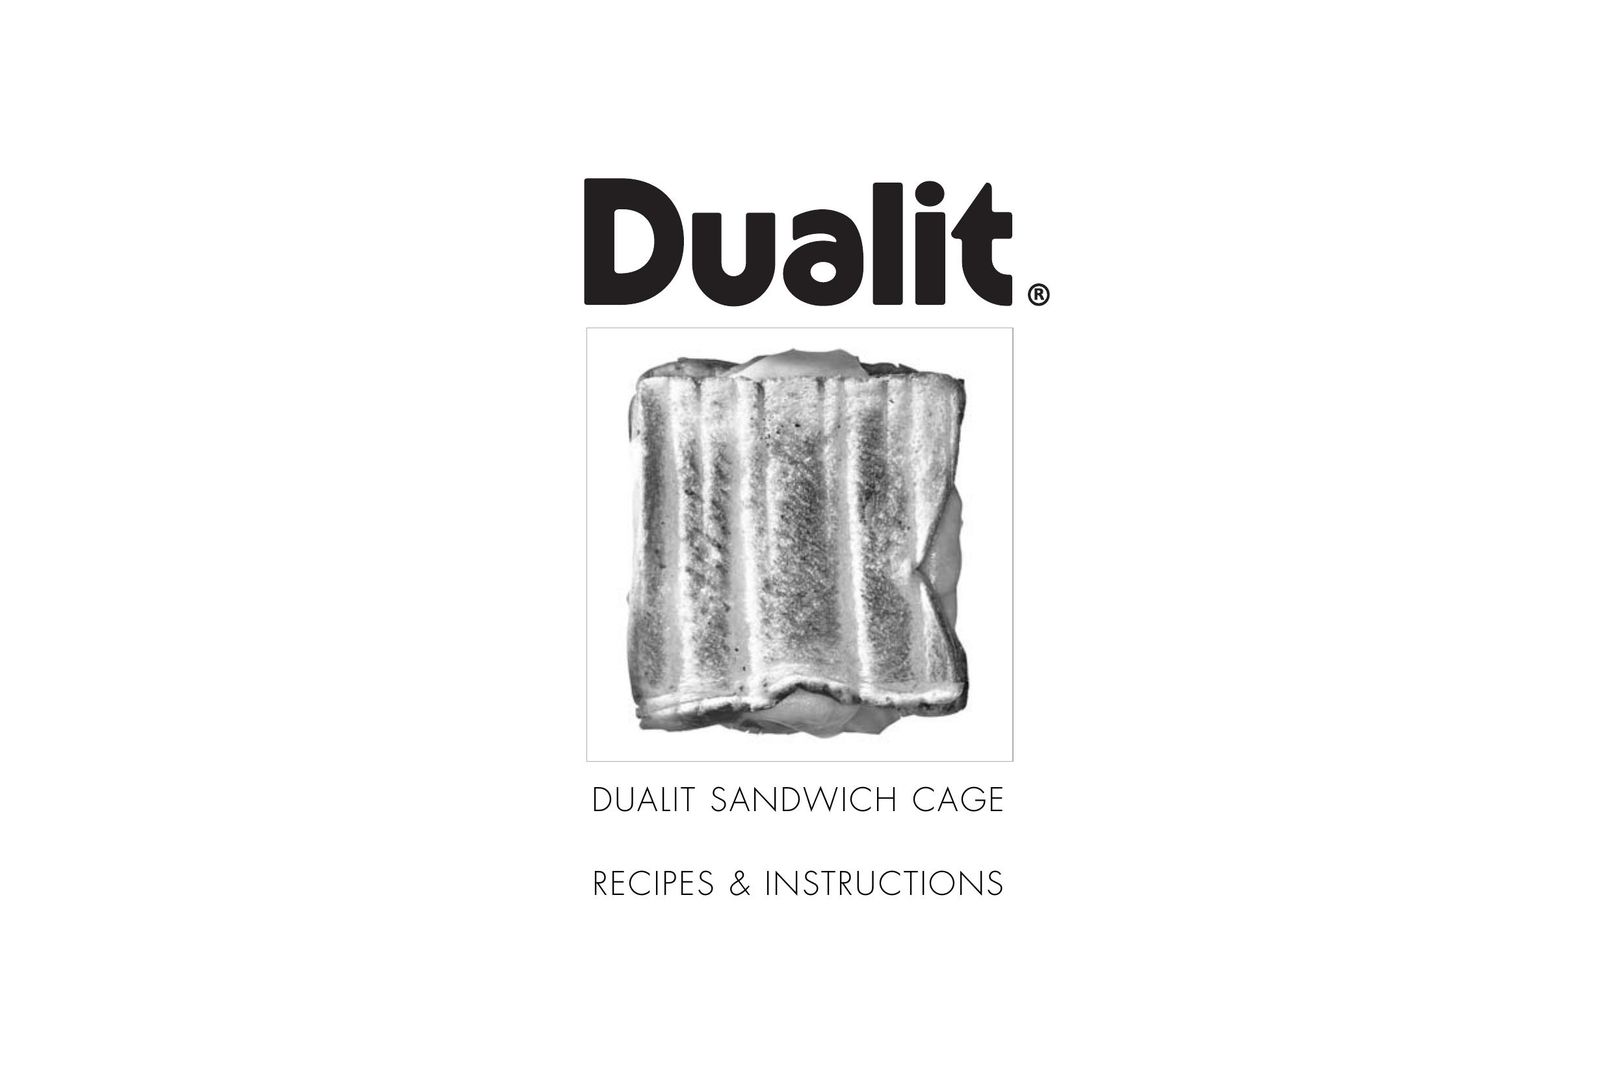 Dualit Sandwich Cage Kitchen Grill User Manual